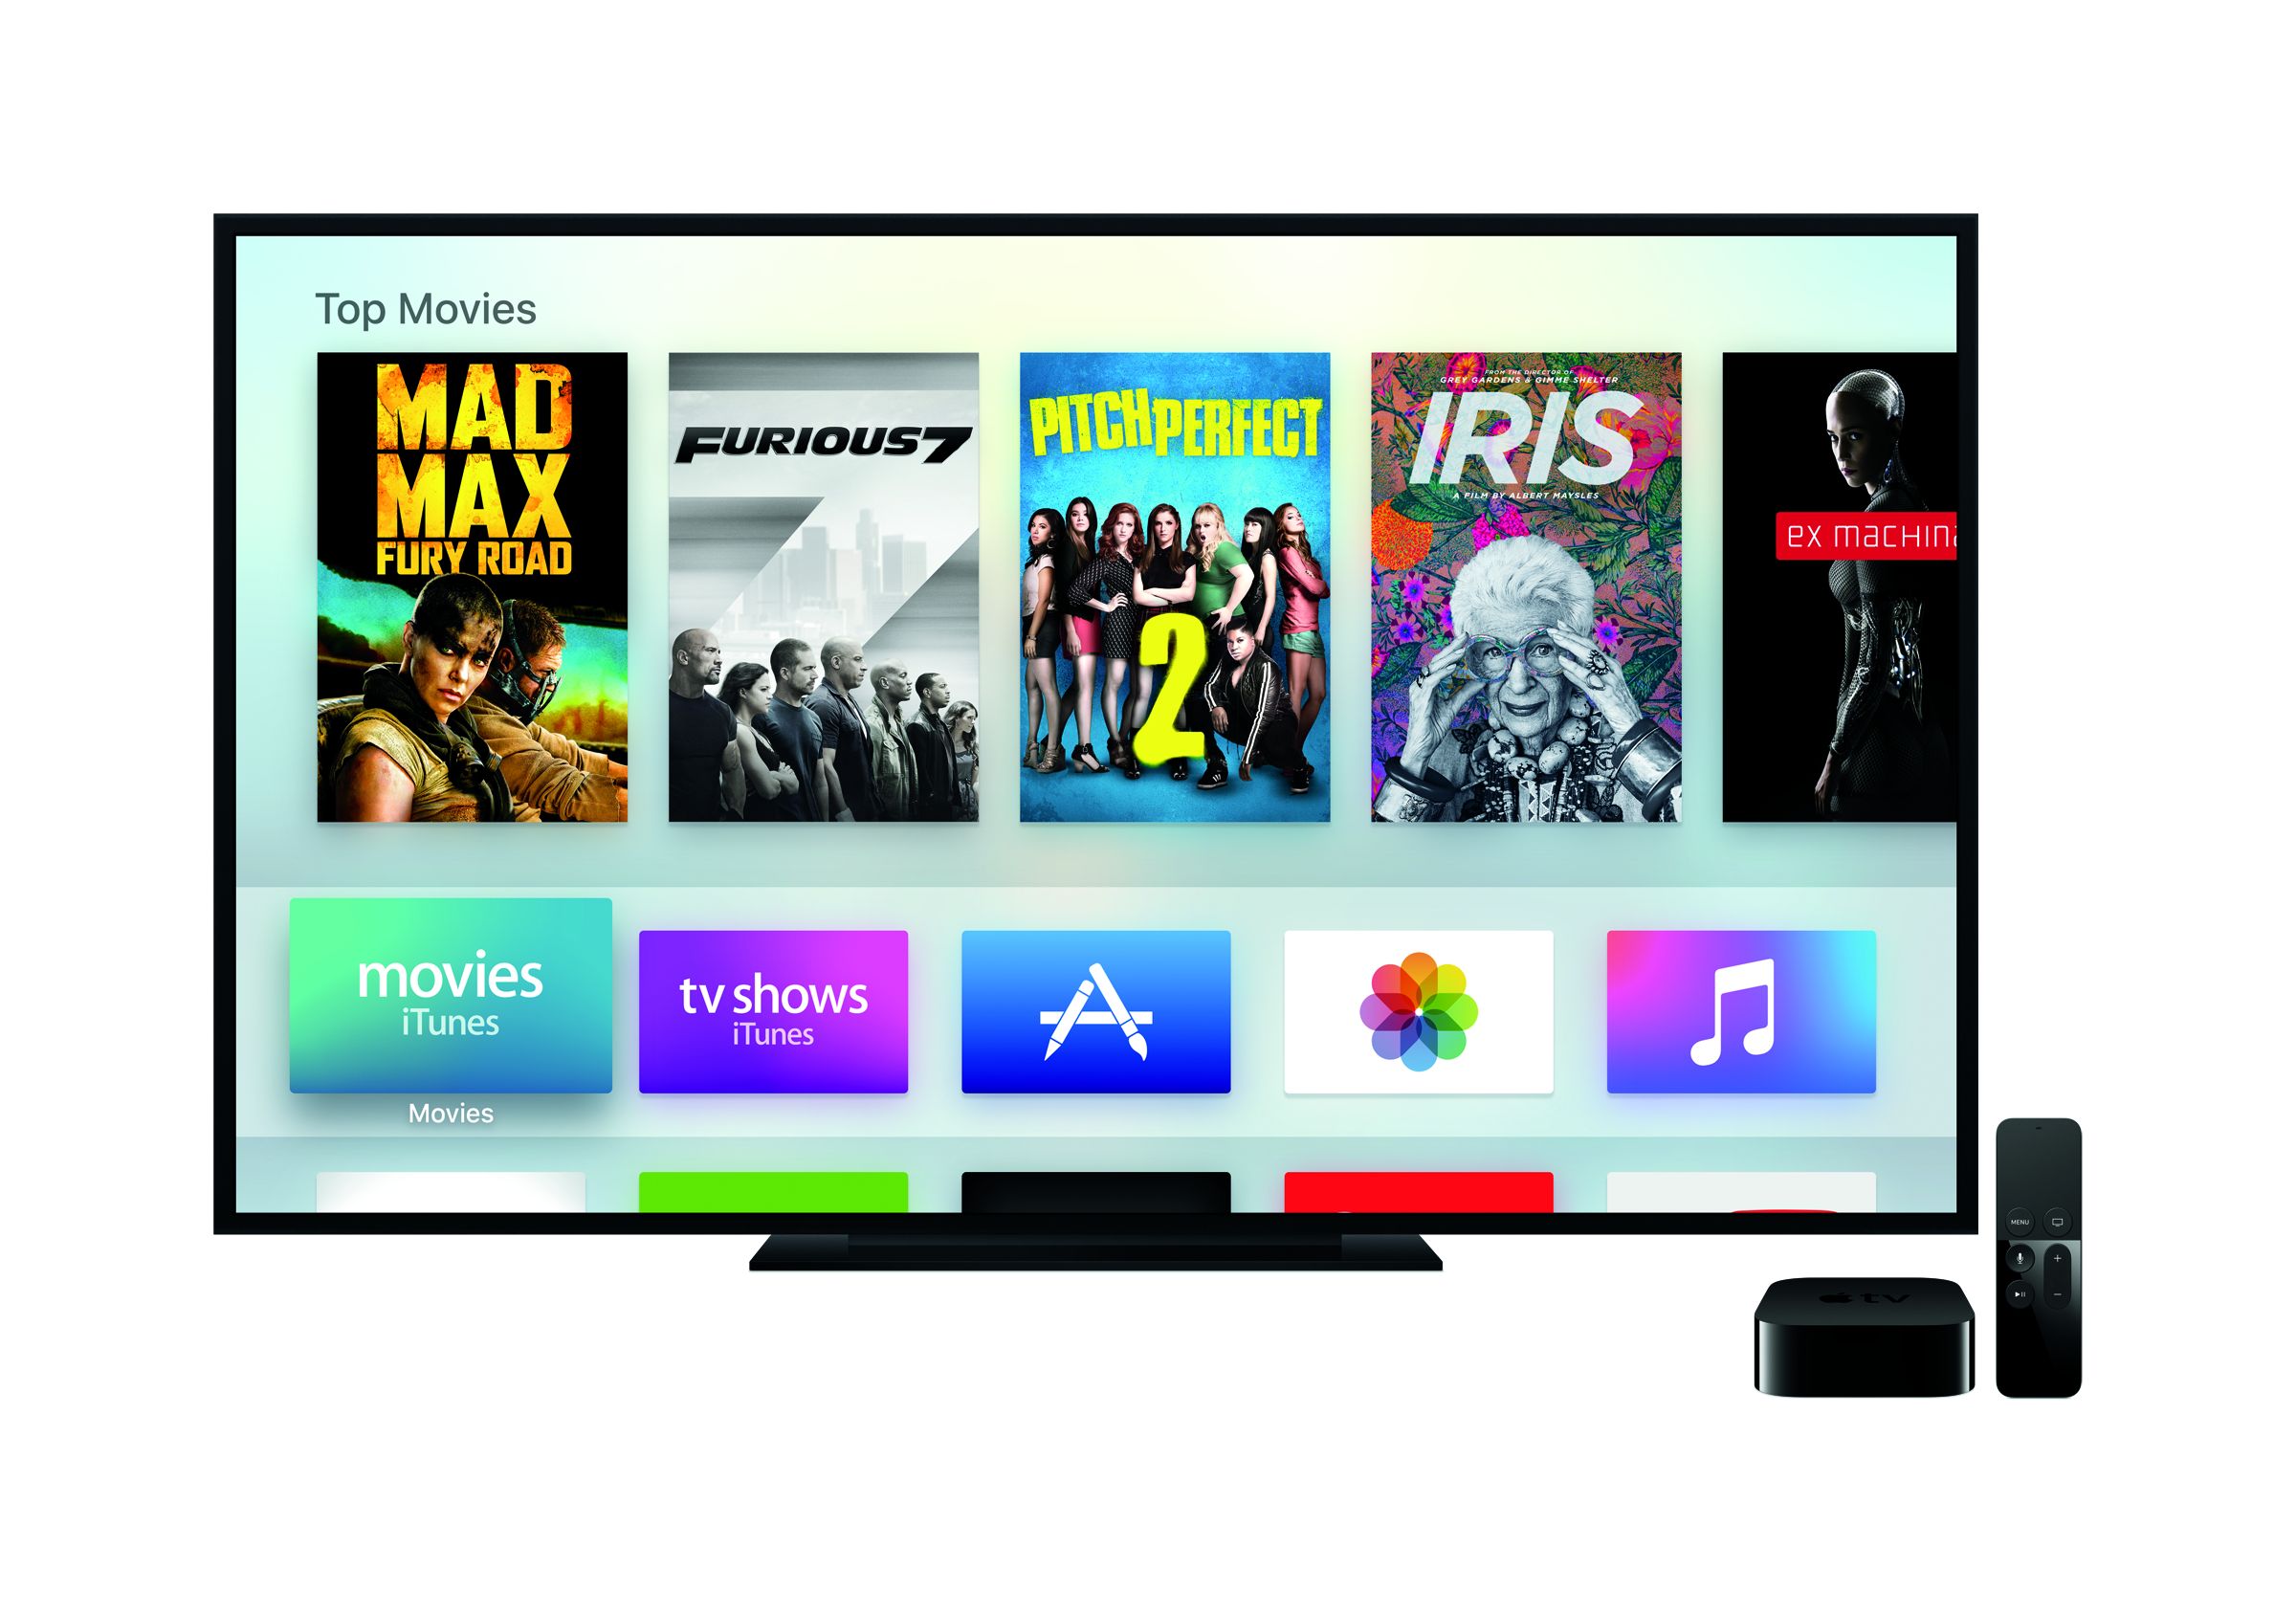 The Apple TV gains gaming ability